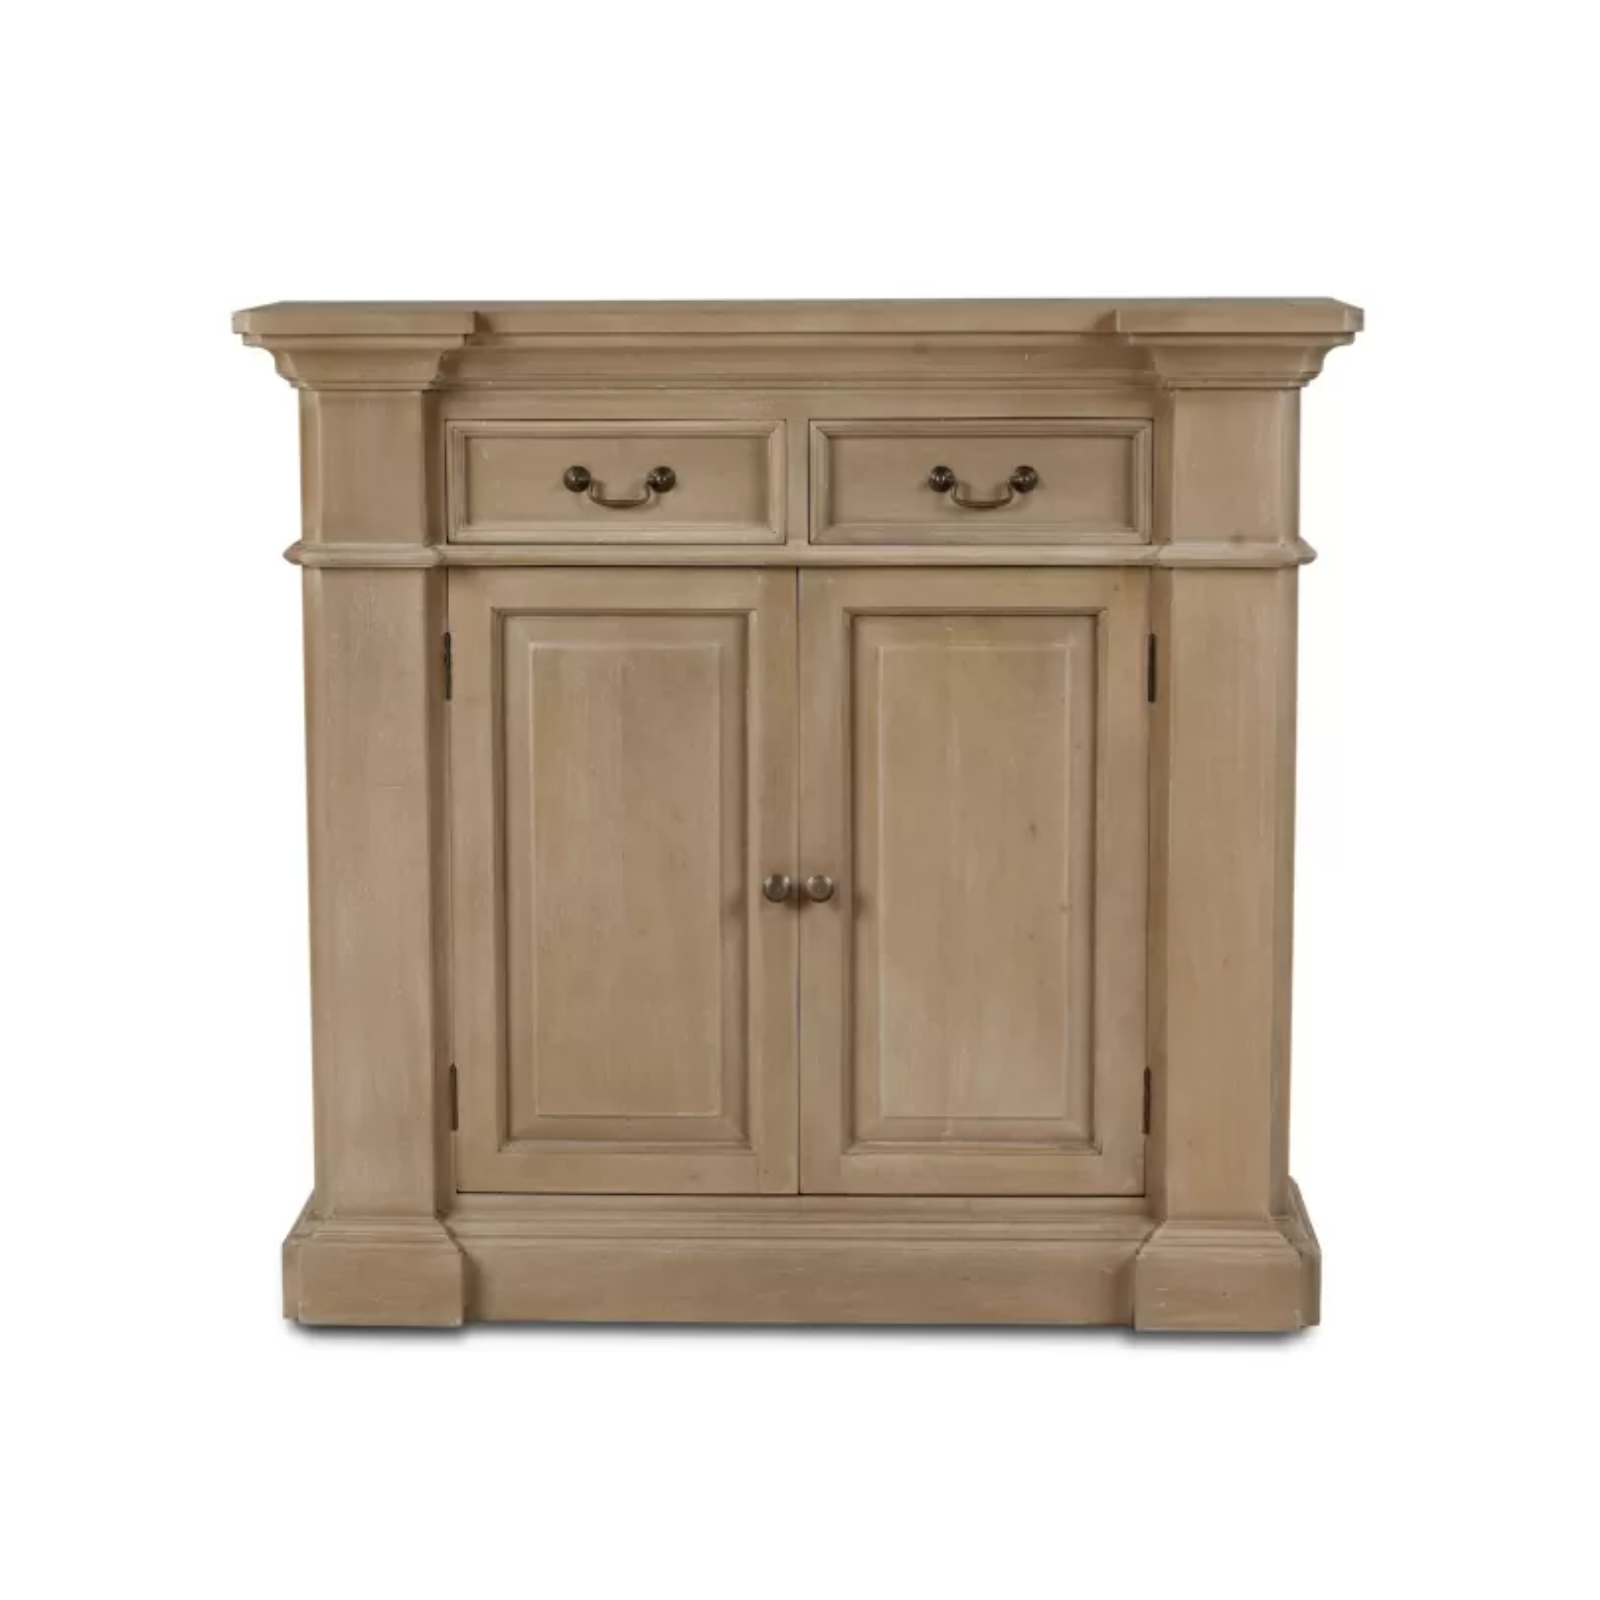 Radcliffe Cabinet